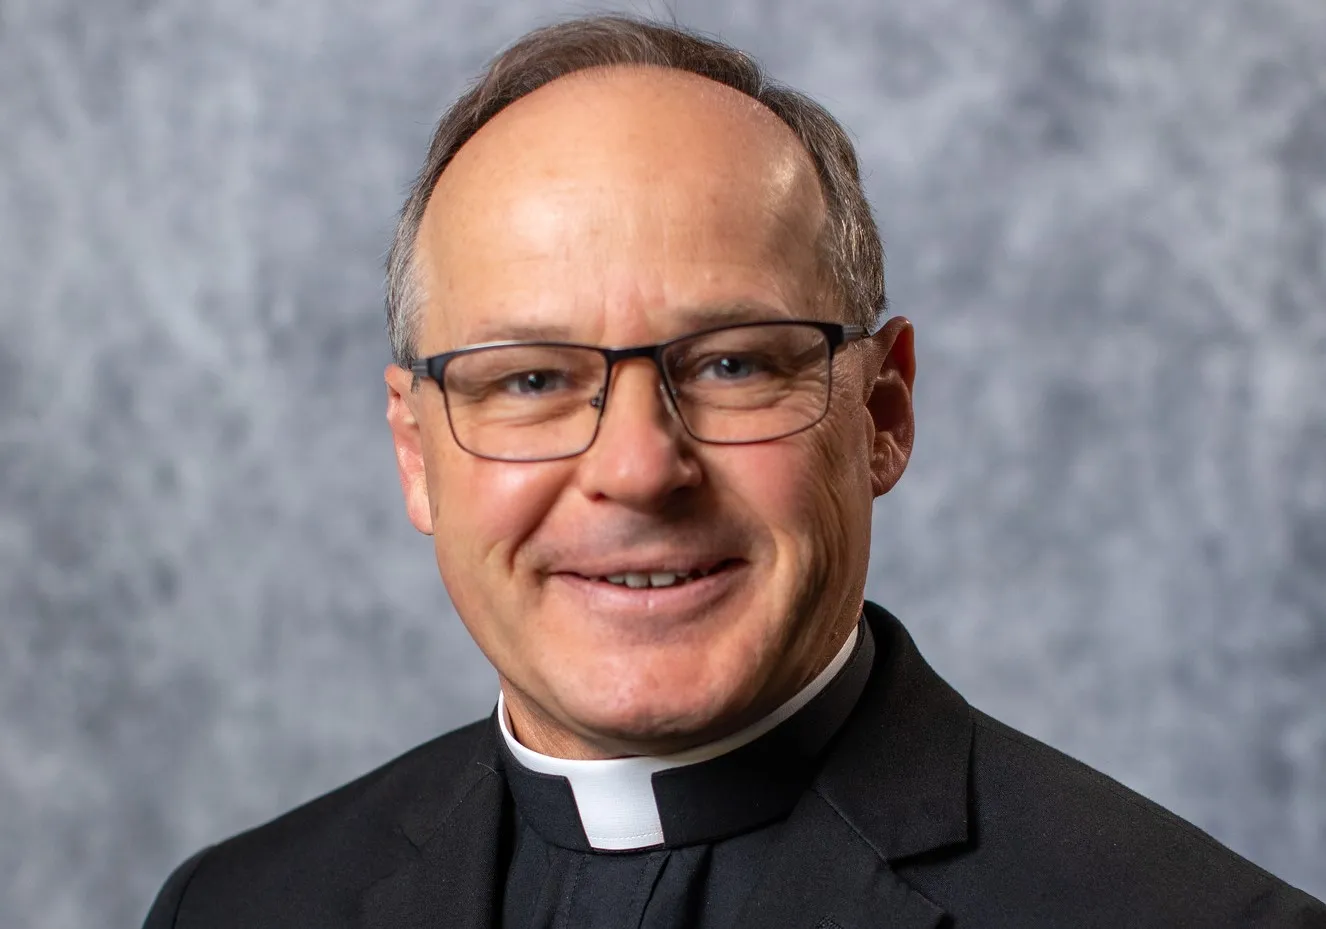 Bishop-elect Edward M. Lohse, 61, will be installed in the Diocese of Kalamazoo, Michigan, on July 25, 2023.?w=200&h=150